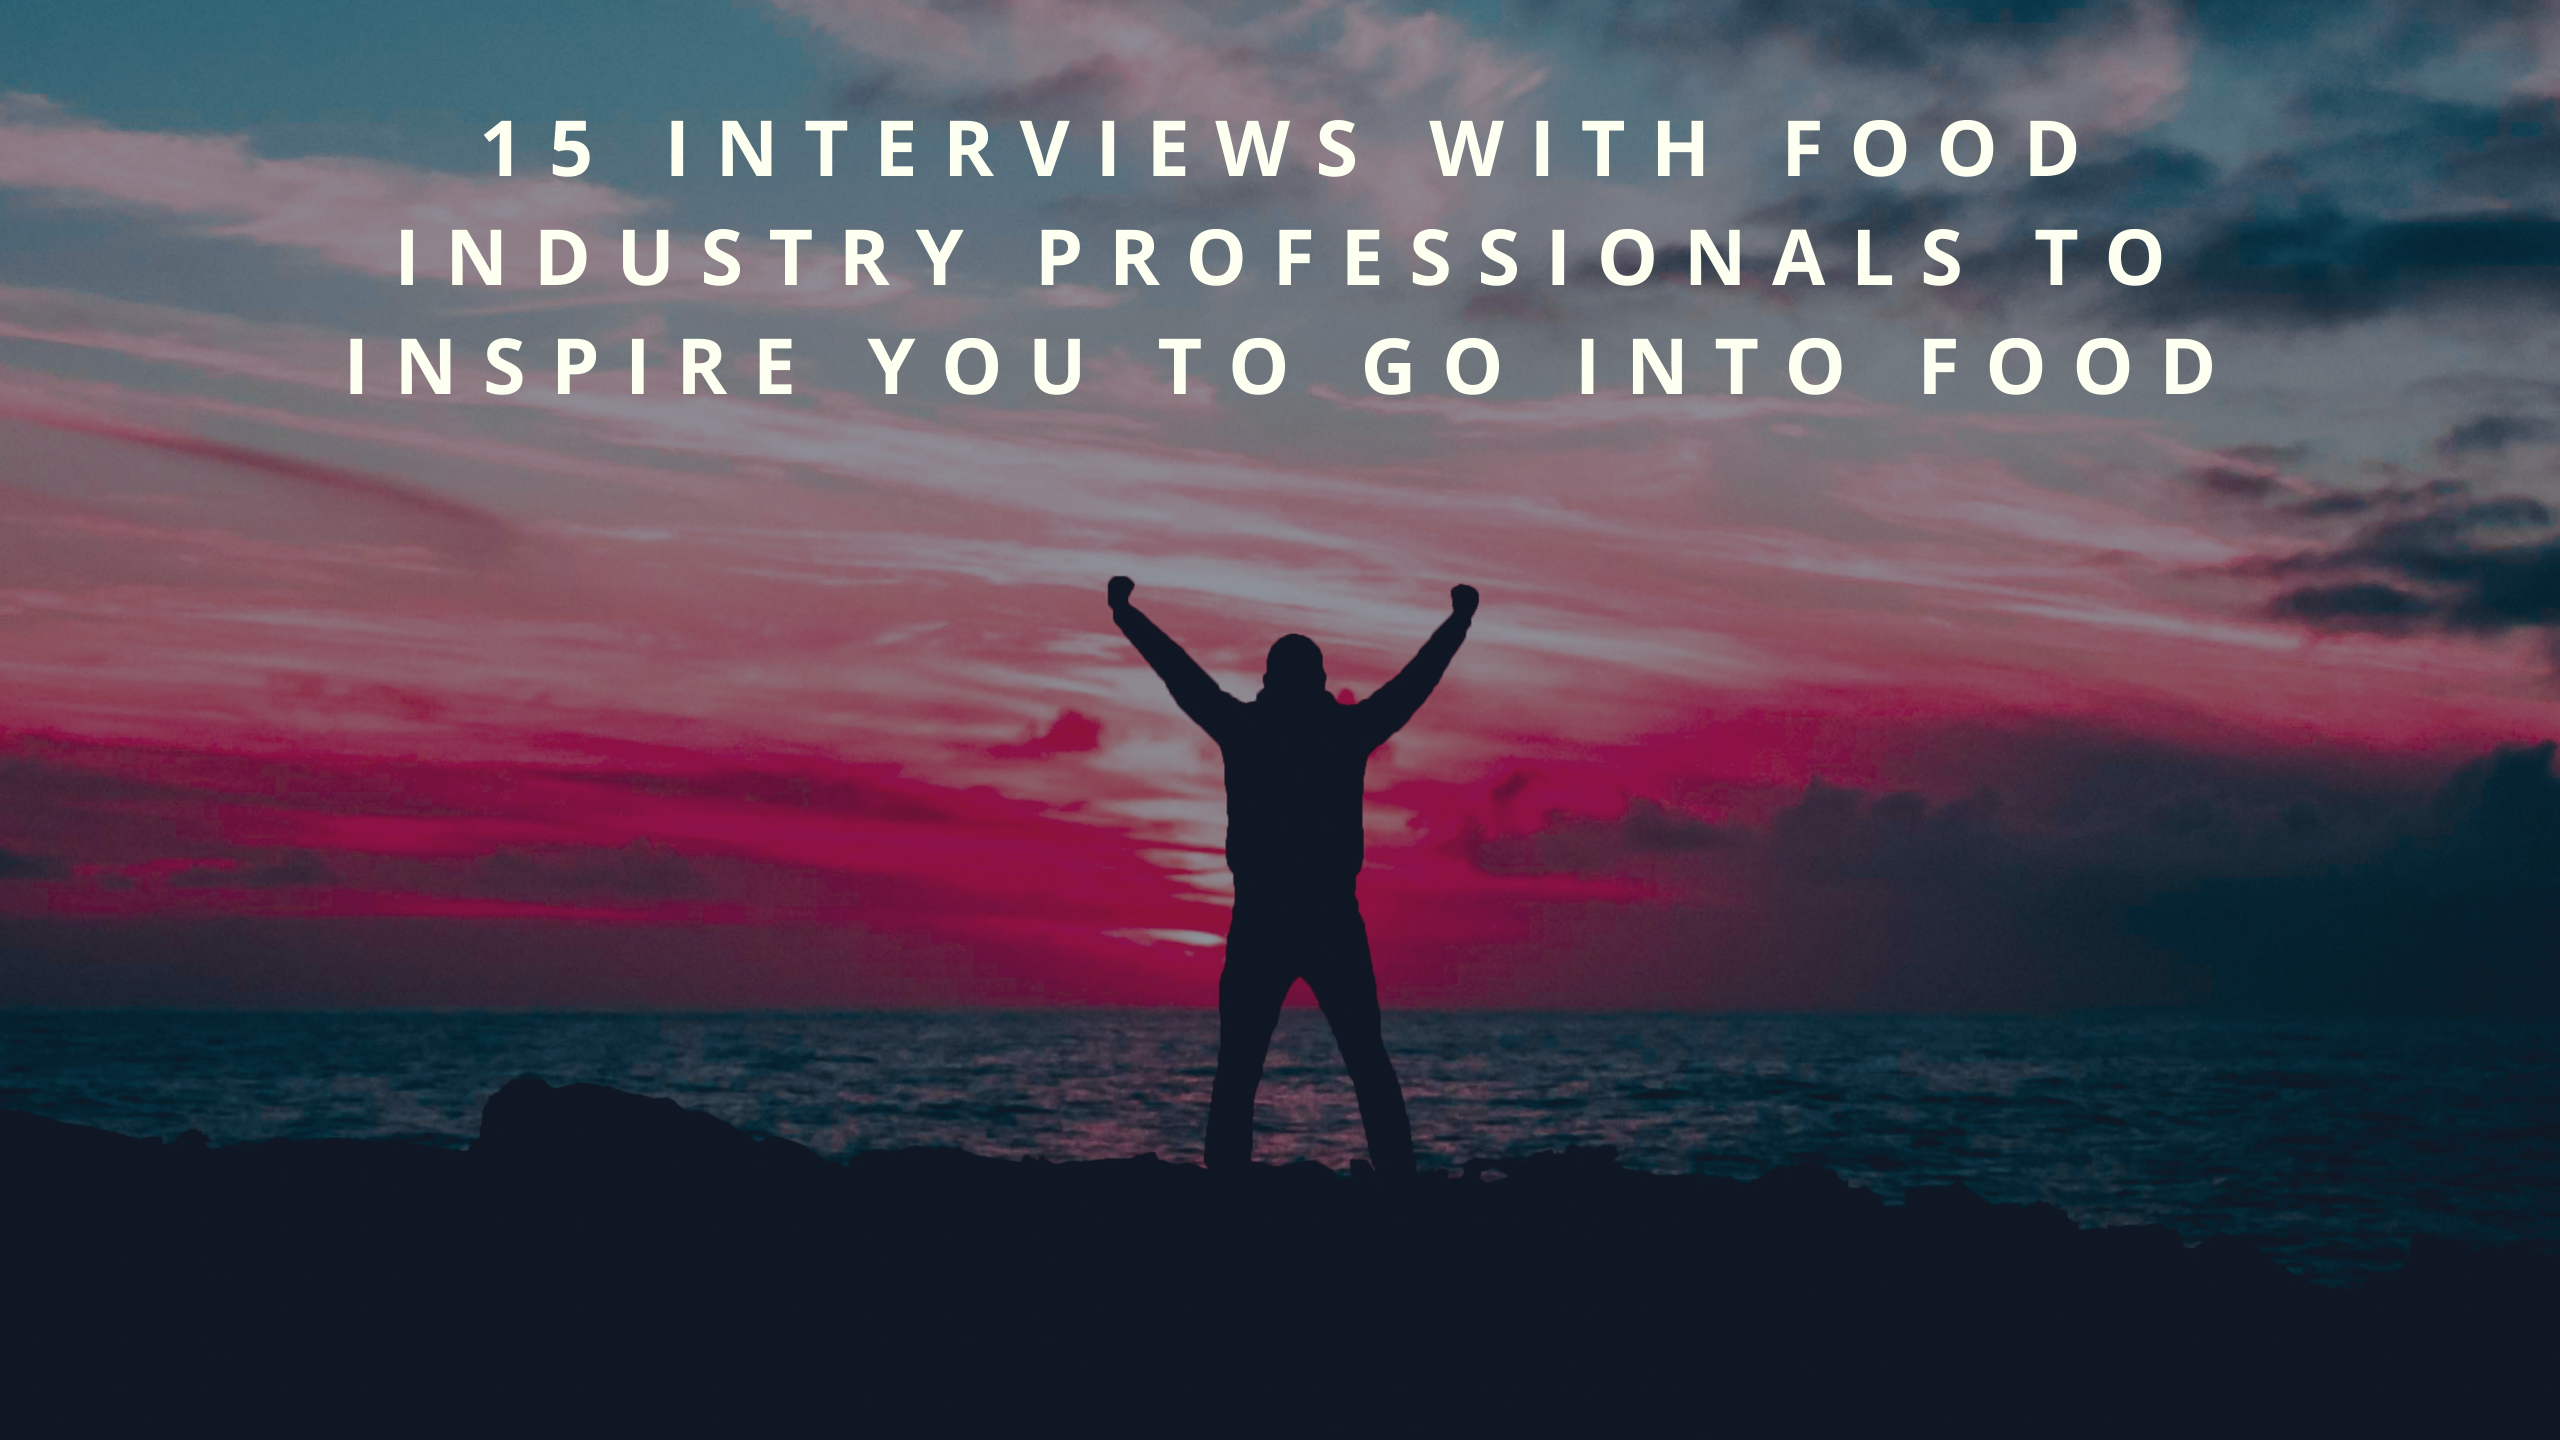 15 Interviews with Food Industry Professionals to Inspire You To Go Into Food